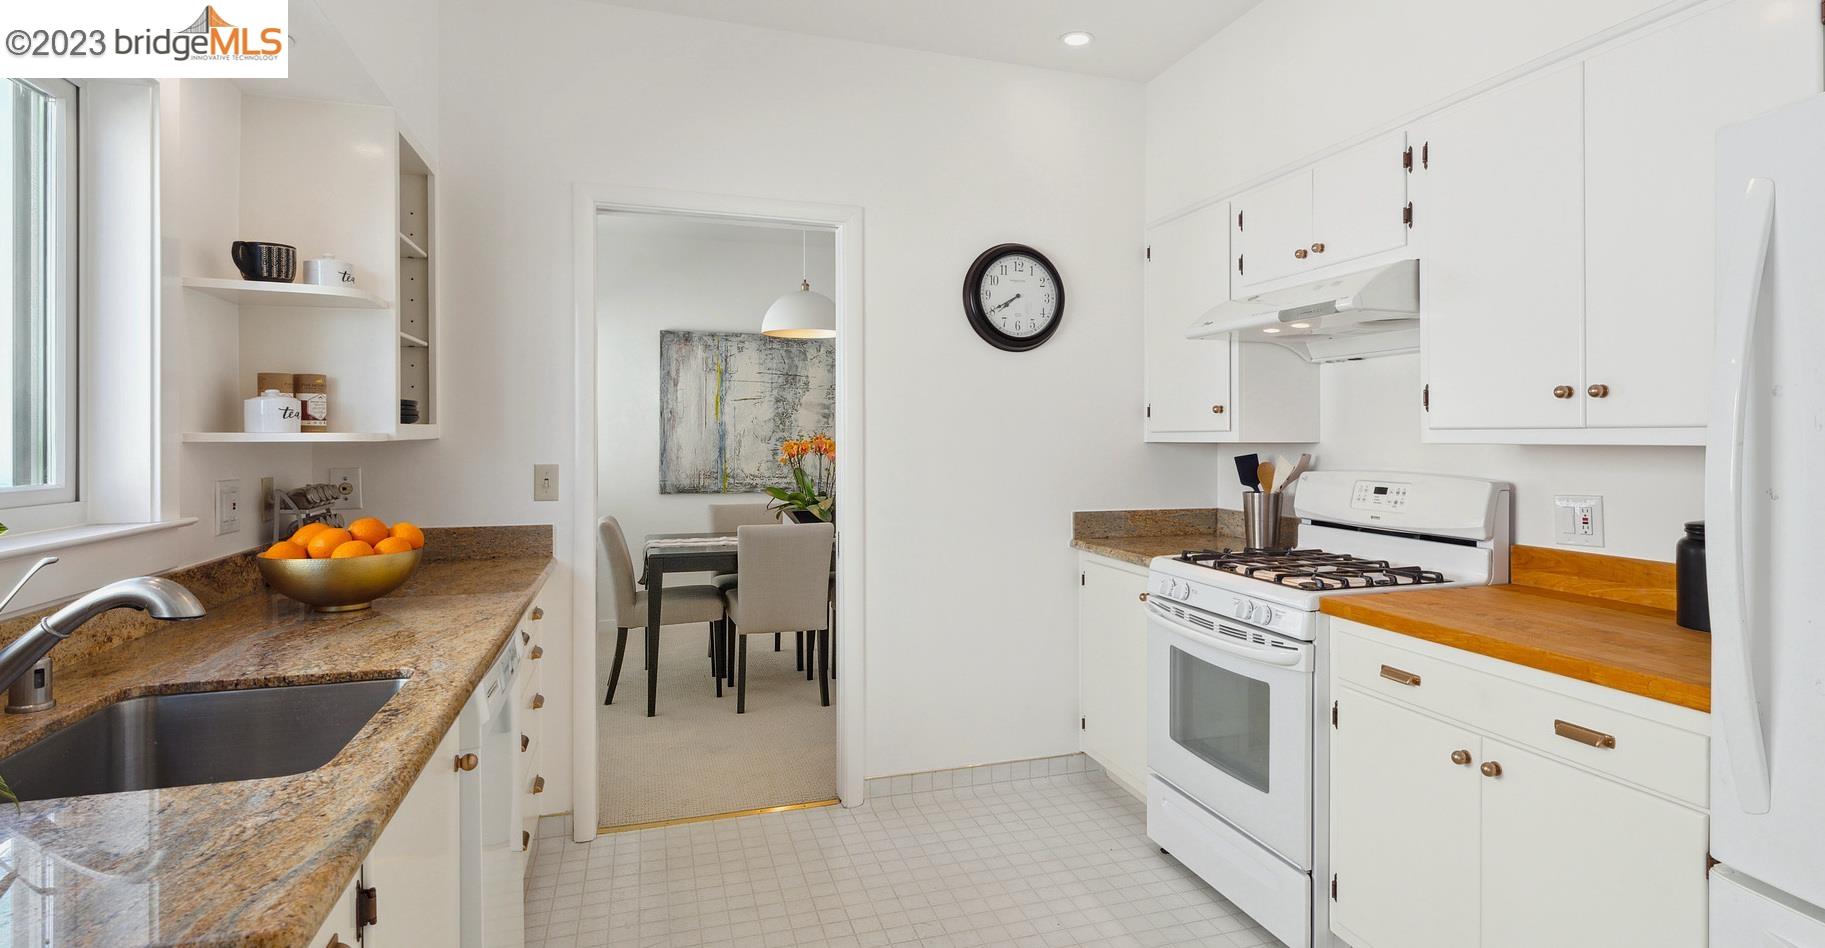 Soak up the charm of this sunny & bright, level-In home with 2 extra-large bedrooms in the Berkeley's Gourmet dining district. Set away from the street in an elevator building with on-site laundry room. New carpets, and freshly painted throughout.  Separate tub and shower stall. One of 11 units in a well-run cooperative, updated with dual-paned windows and exterior paint in 2021, offering community living with no common walls. - Downsizing ?.... You'll find built-ins next to the fireplace, cabinets galore in kitchen and 5 closets throughout the unit plus, your own extra storage unit in parking area. Easy elevator access, carport parking, Peaceful garden courtyard and all the nearby amenities of this convenient North Berkeley neighborhood. Close to Peet's Coffee, Safeway, CVS pharmacy, Andronico's, Saul's Deli, The Cheese Board and Chez Panisse. Strong community vibe with extensive access to Bay area public transportation.